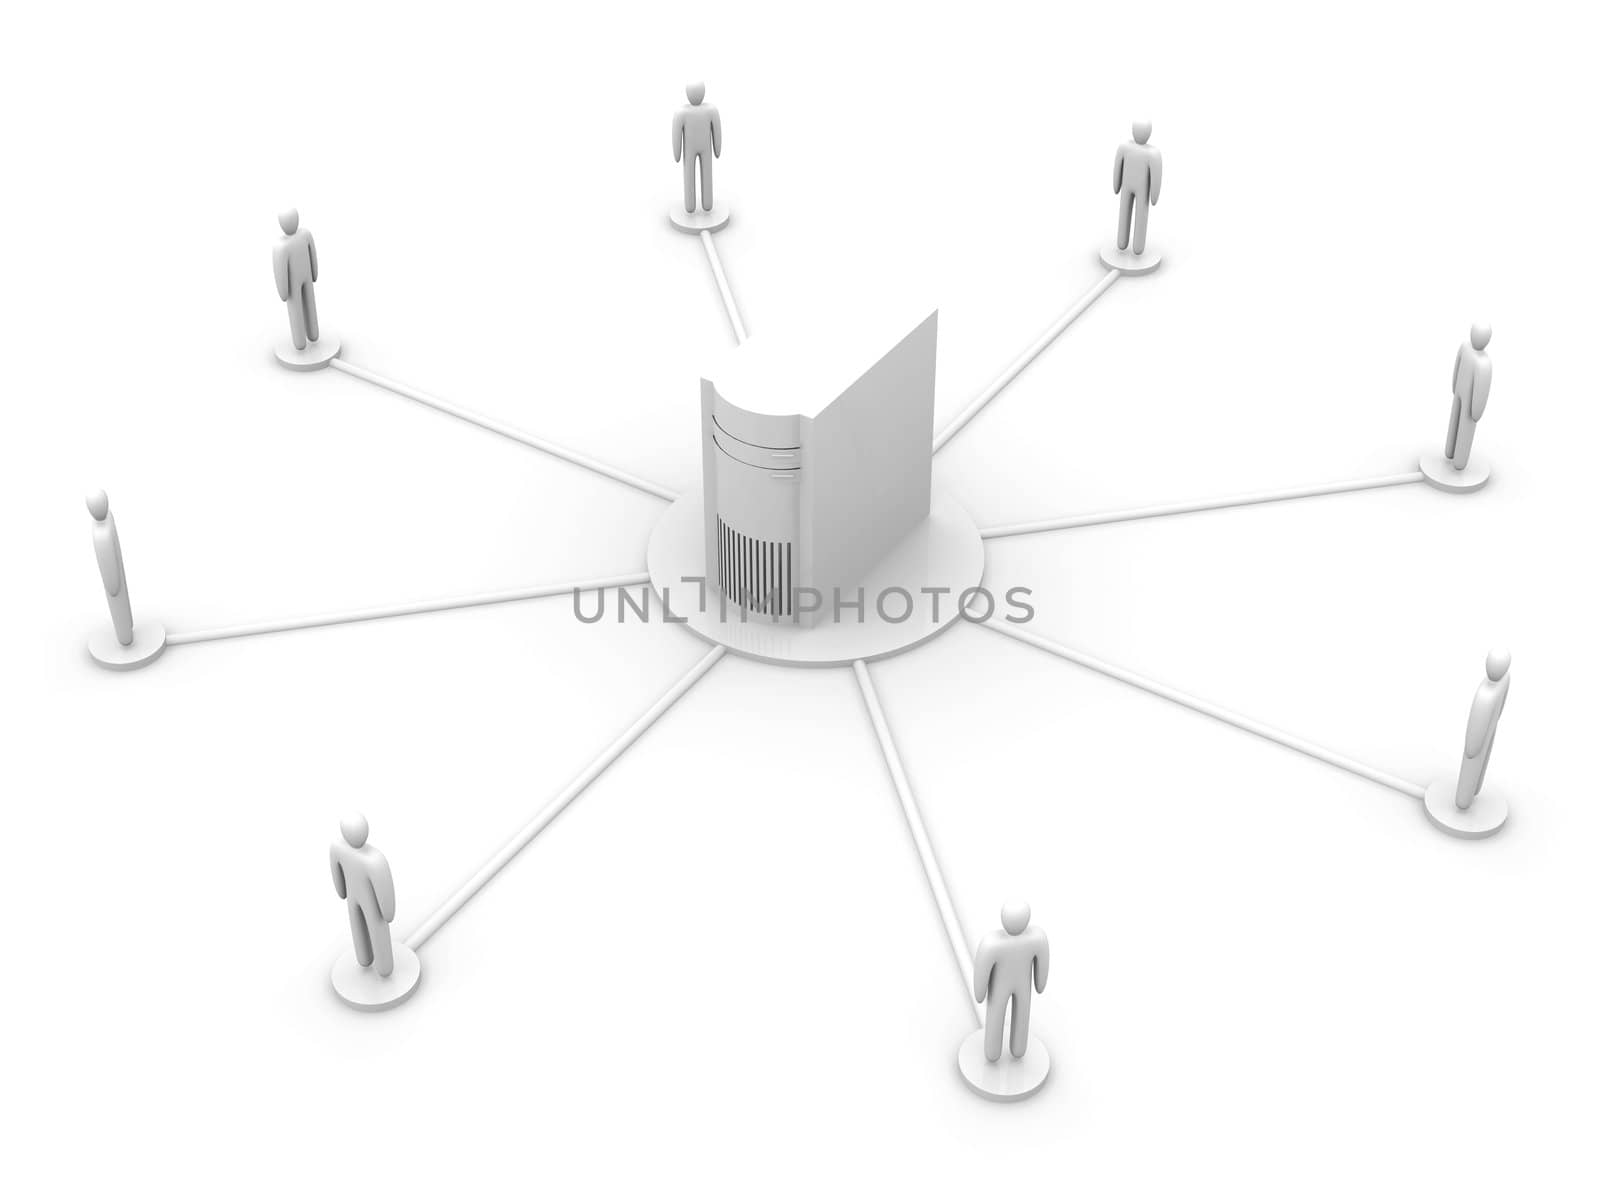 Connected People. 3D rendered illustration.